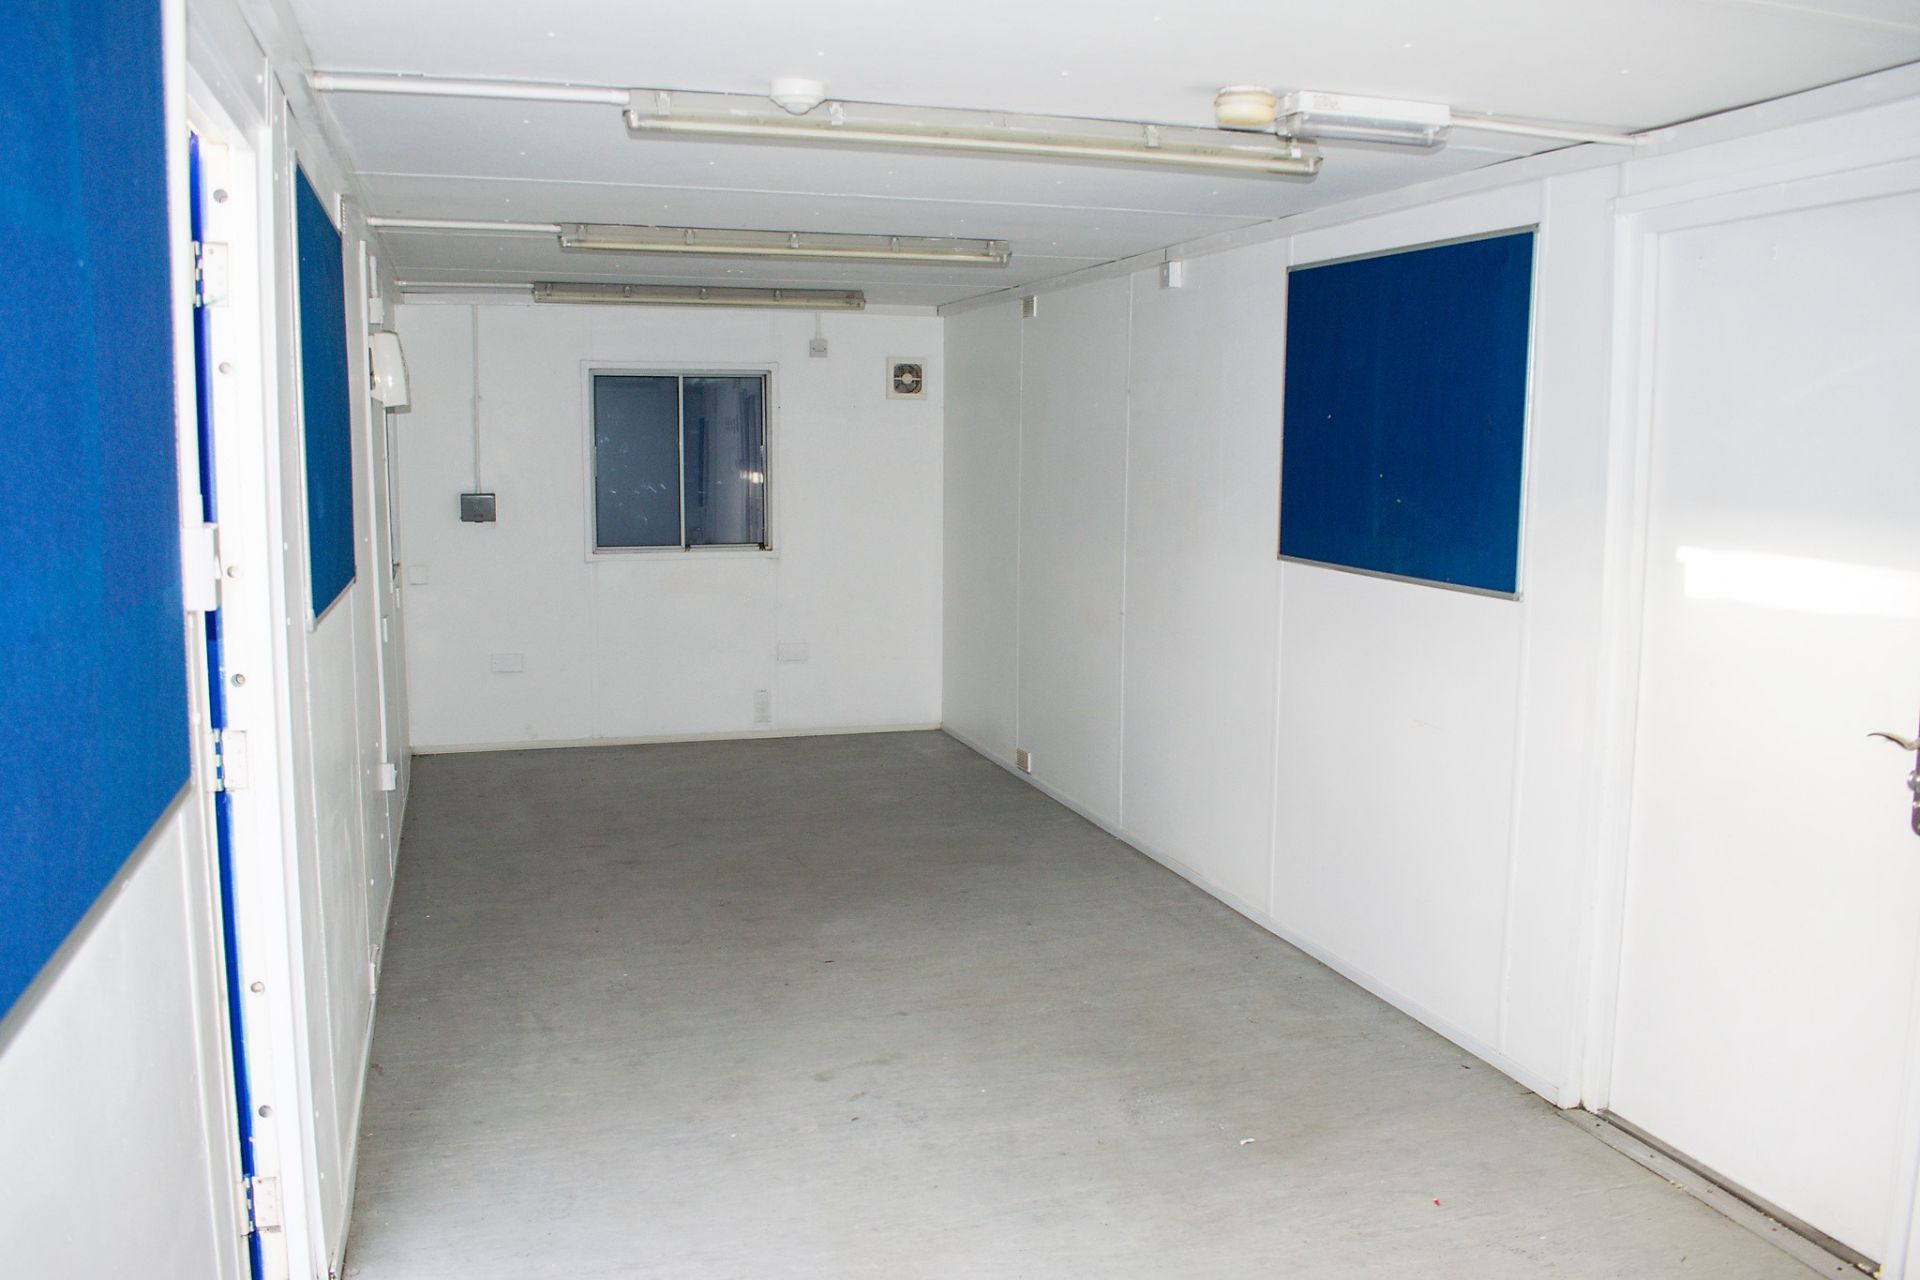 32 ft x 10 ft steel anti vandal office site unit Comprising of: office room & kitchen area c/w - Image 6 of 7